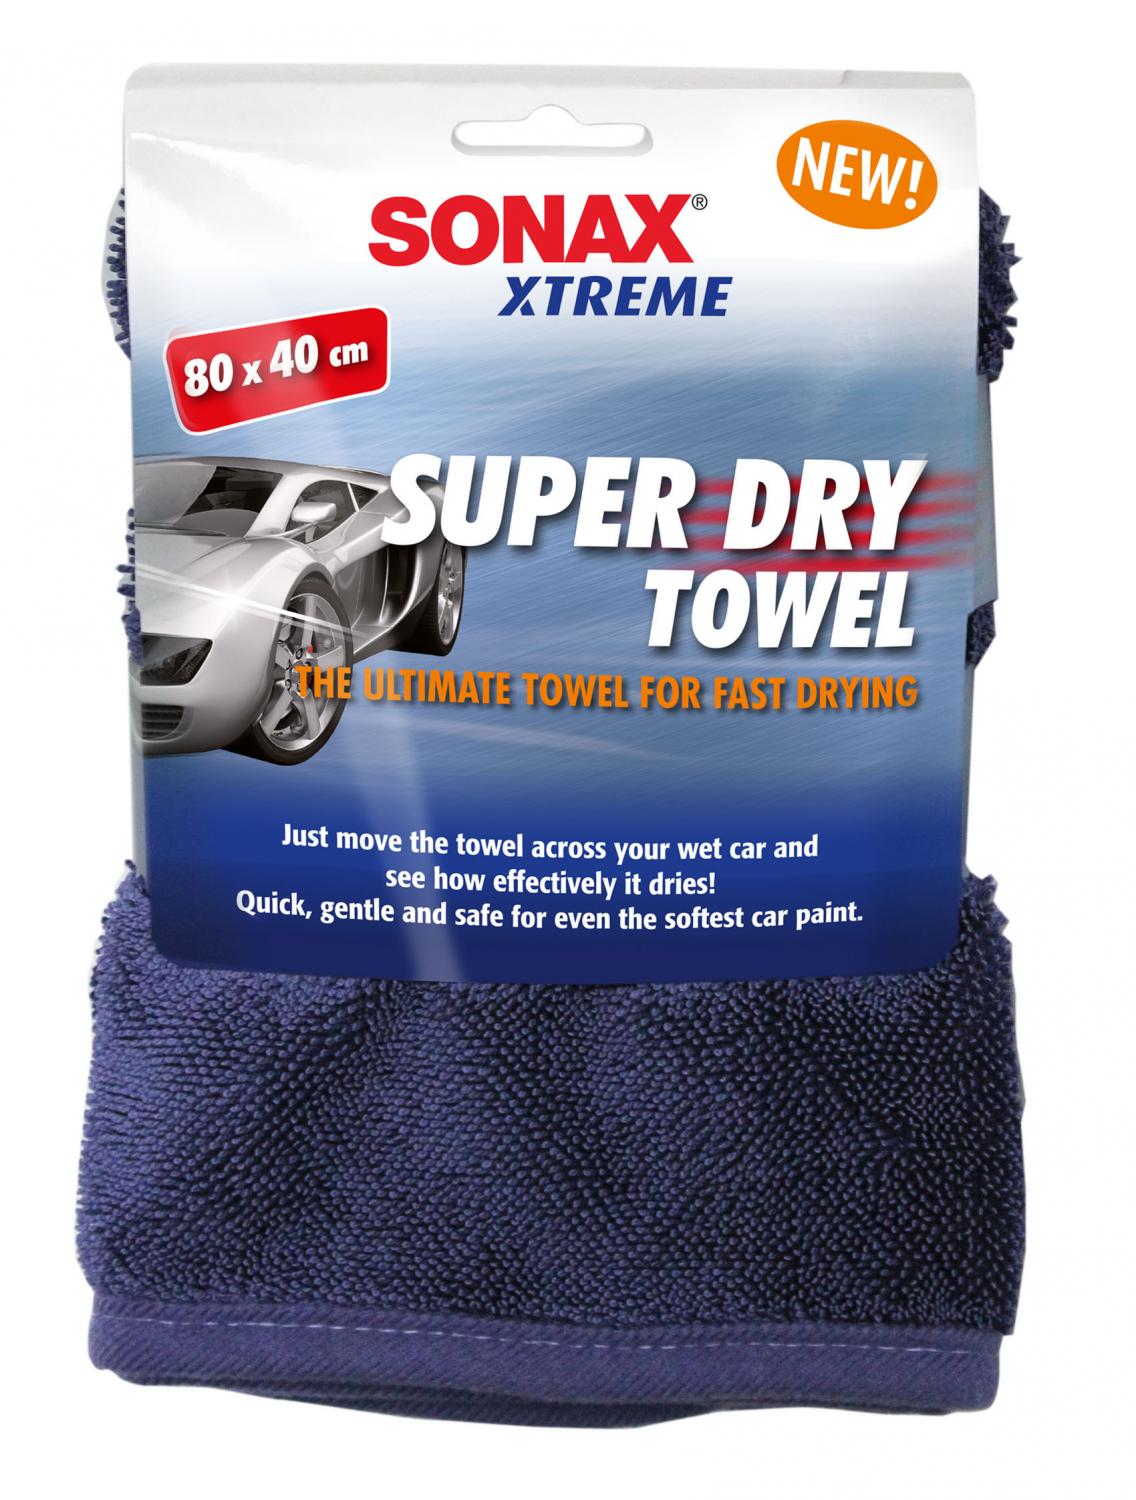 SONAX XTREME ULTIMATE SUPER DRY TOWEL 80x40cm FAST DRYING